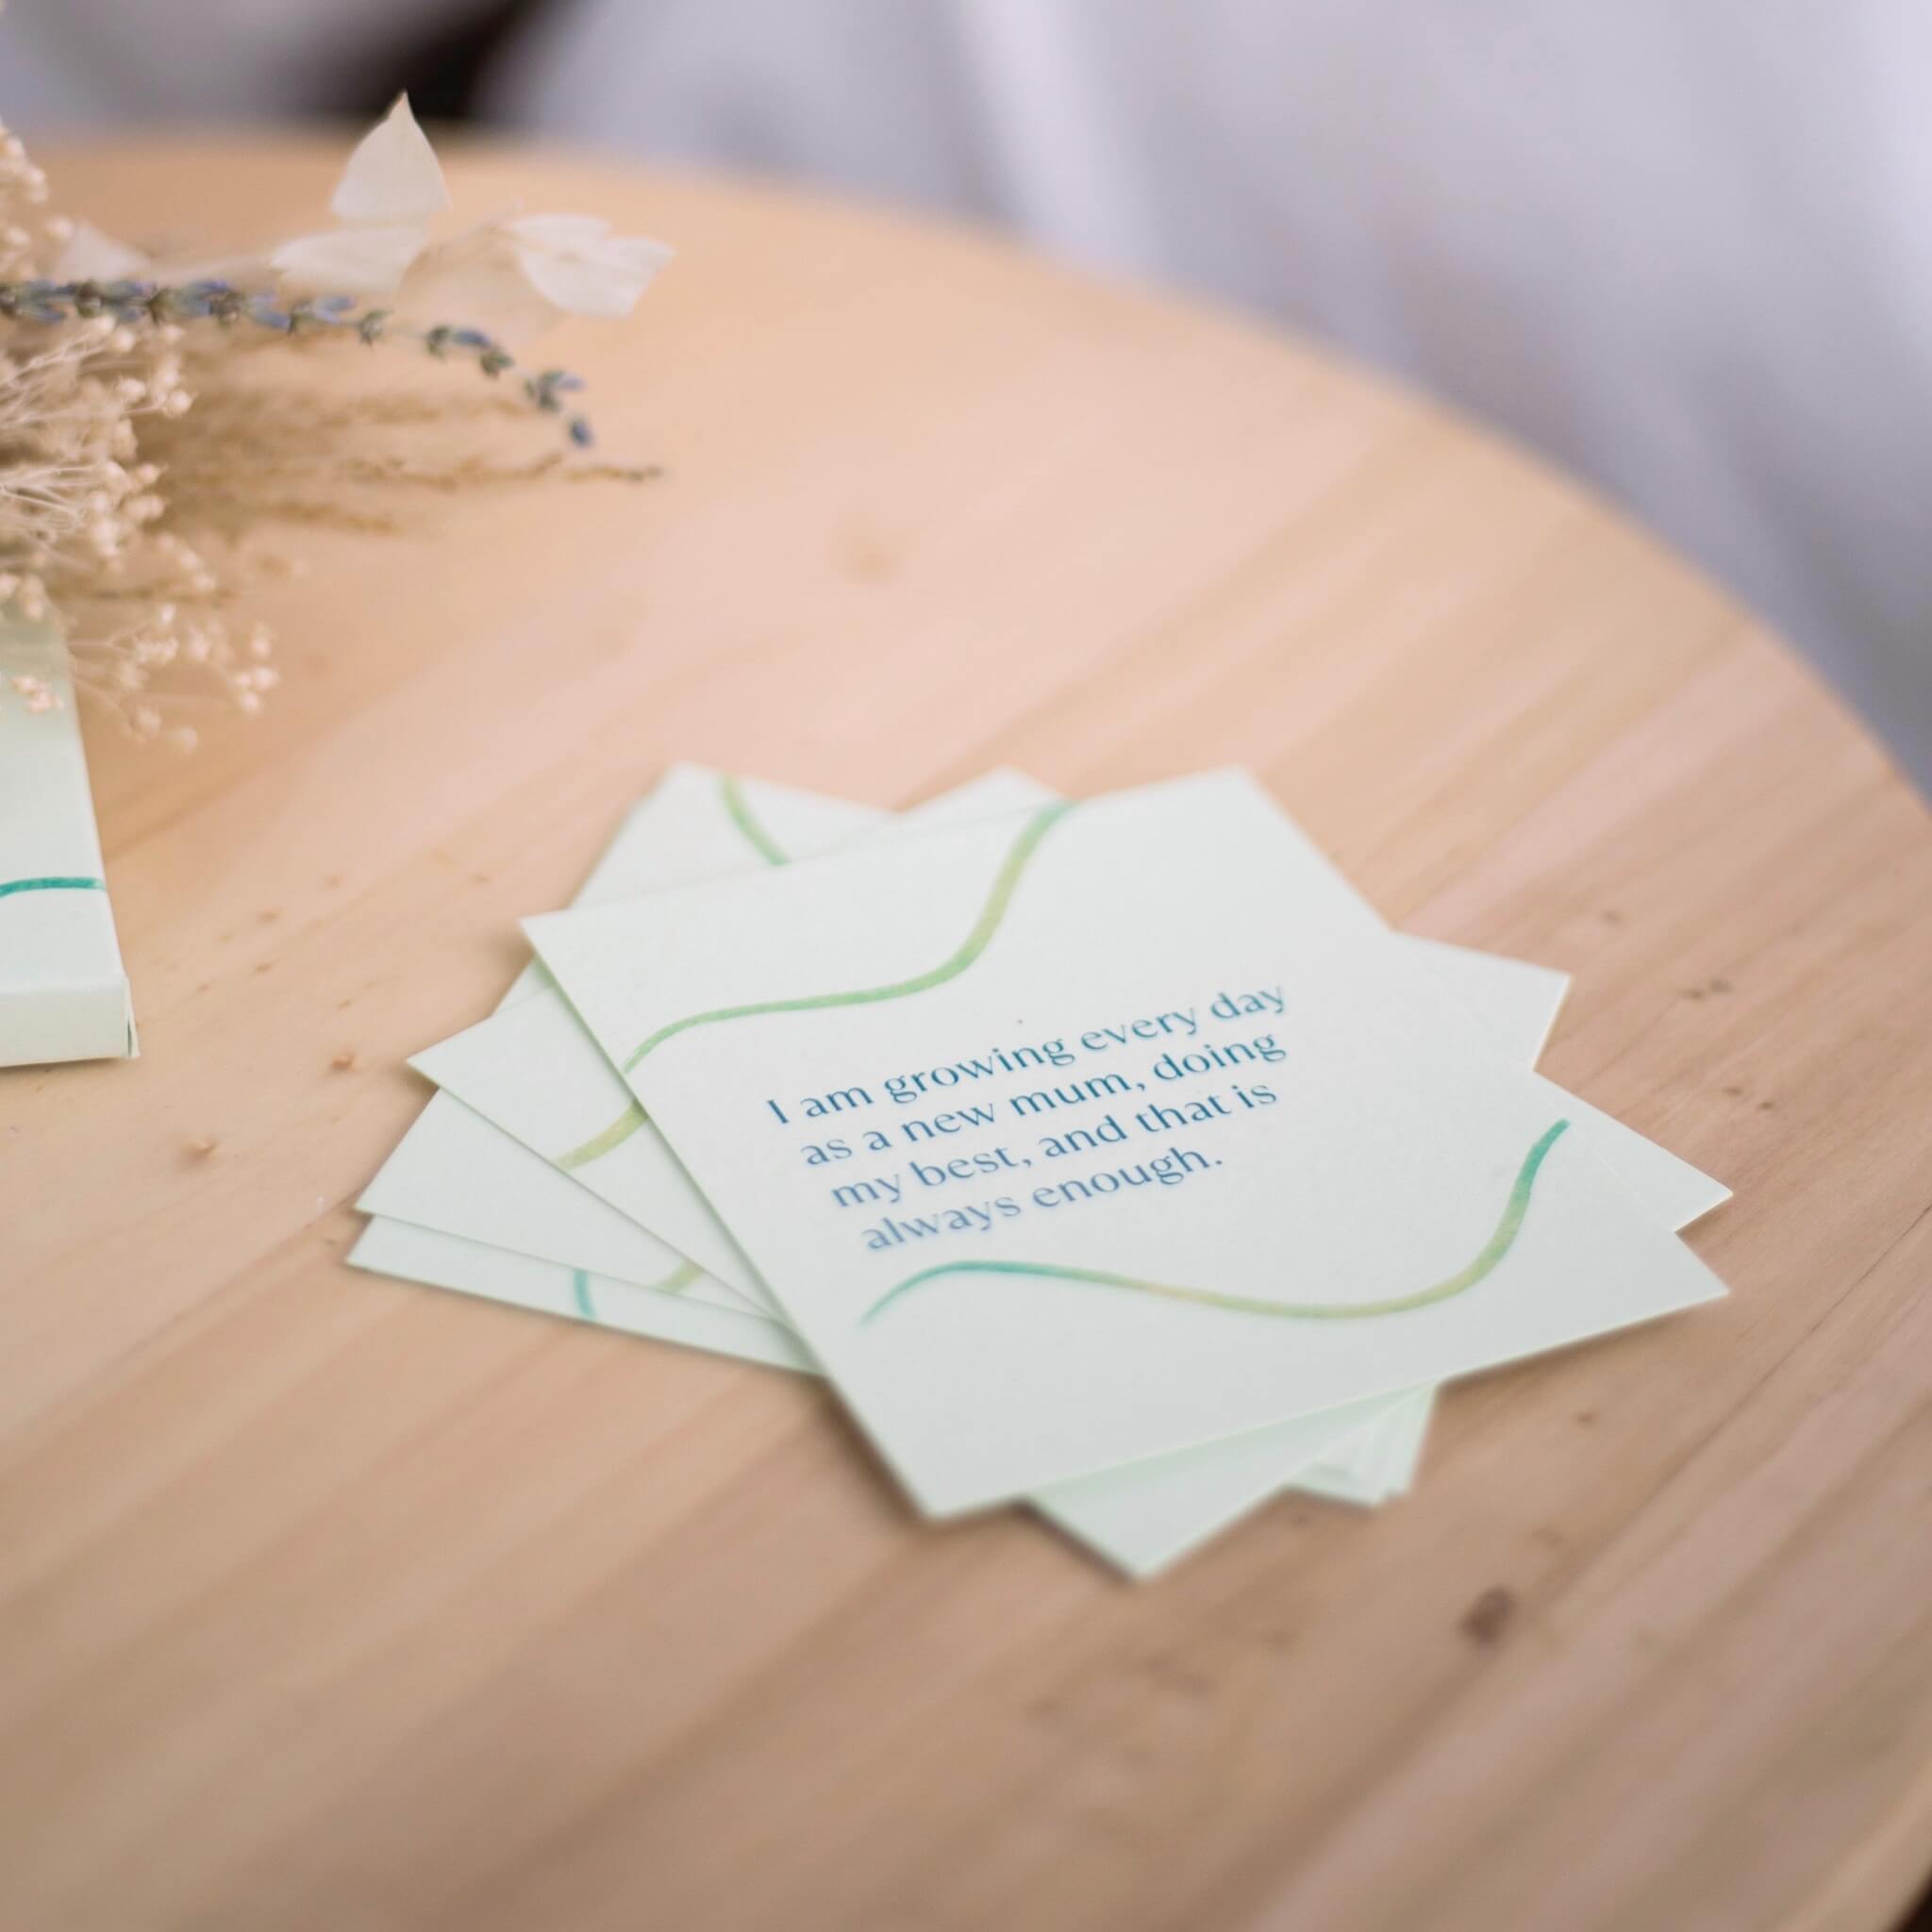 new mum affirmation cards with stand on bedside table